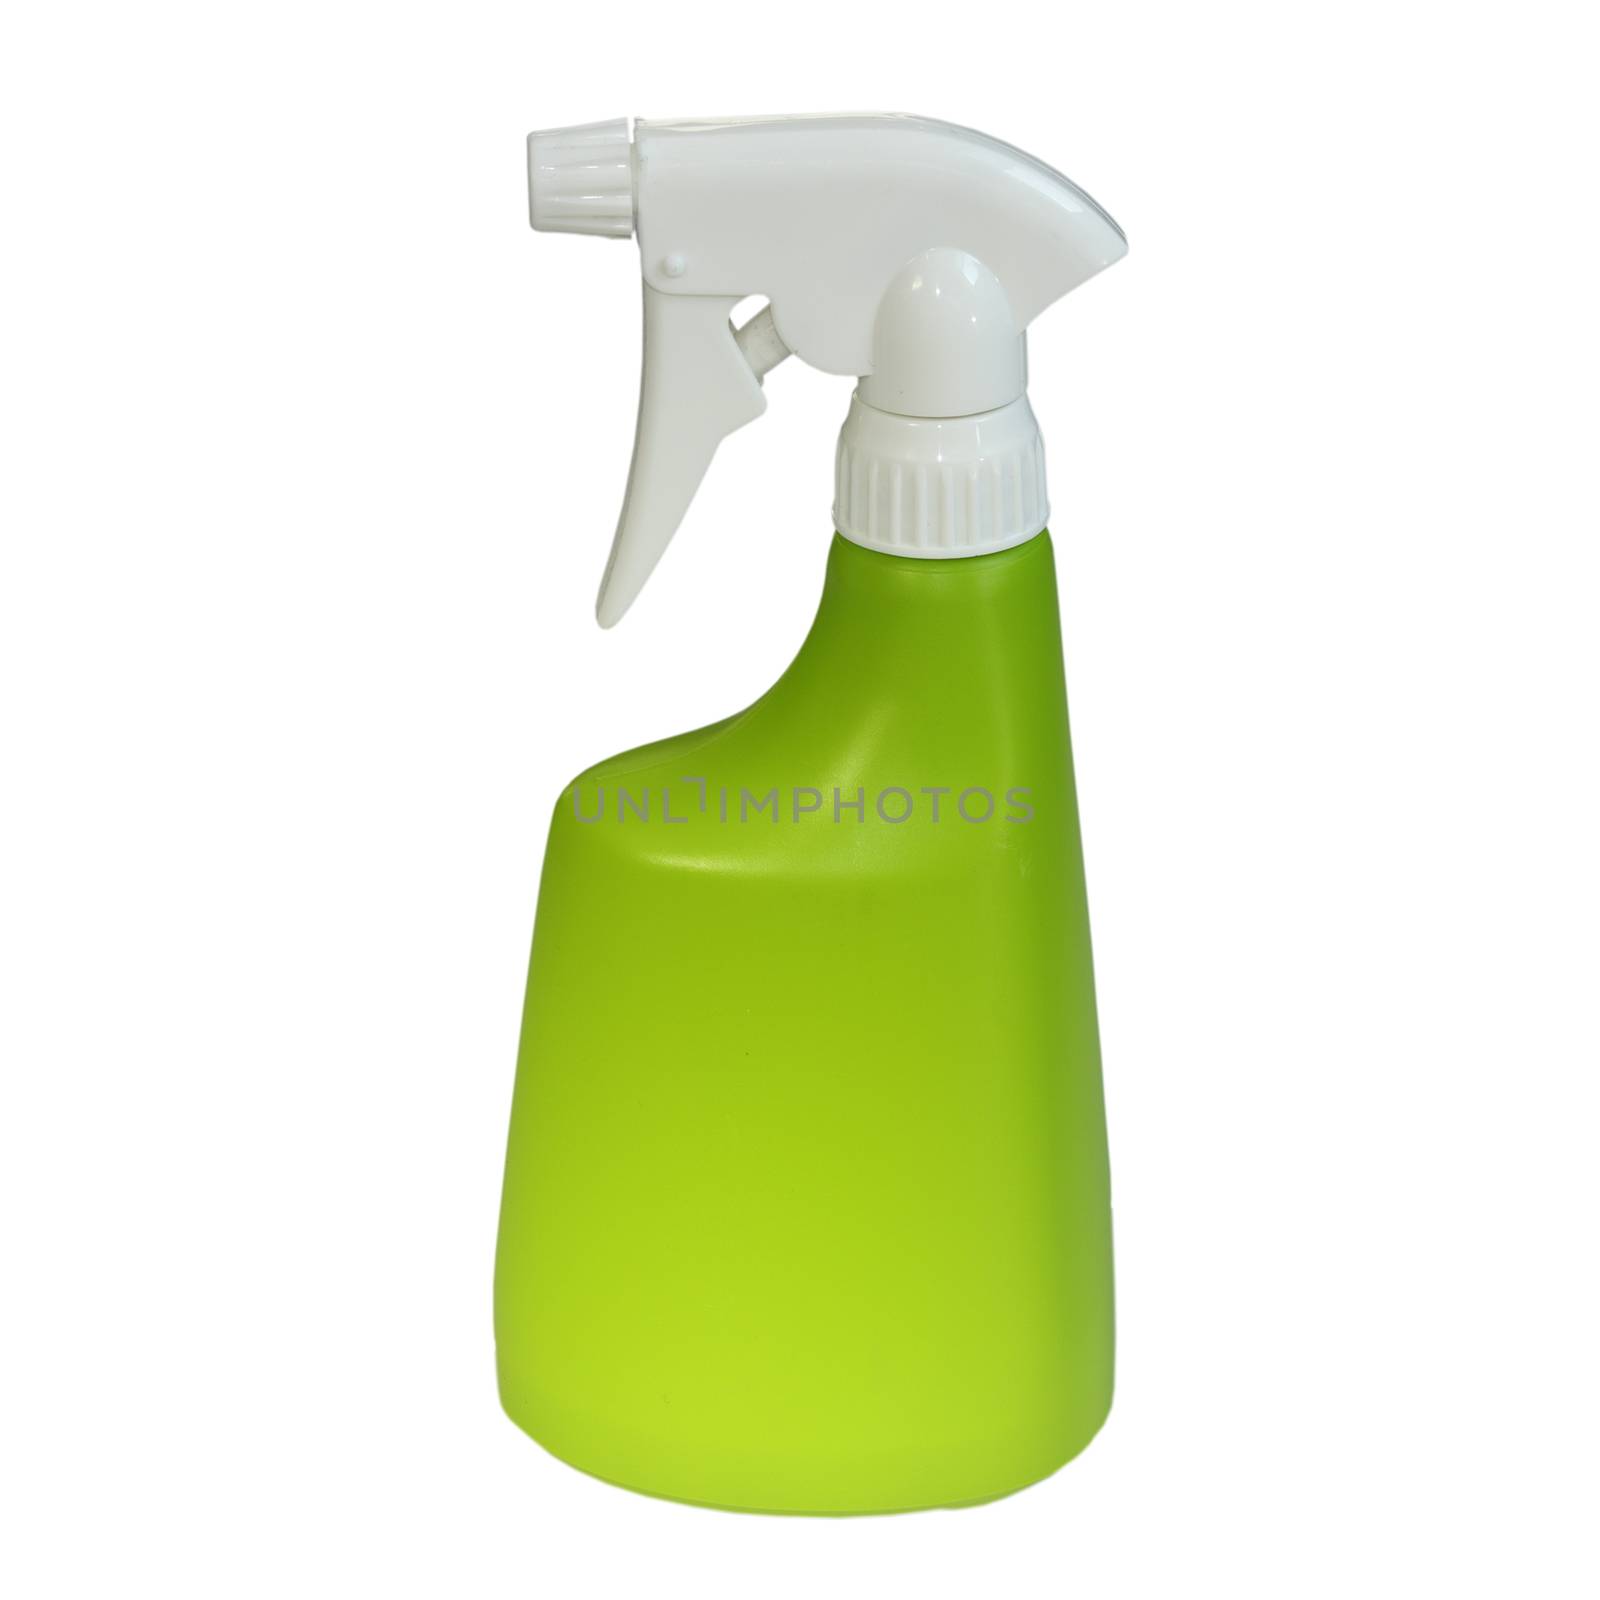 green plastic water sprayer isolated over white background